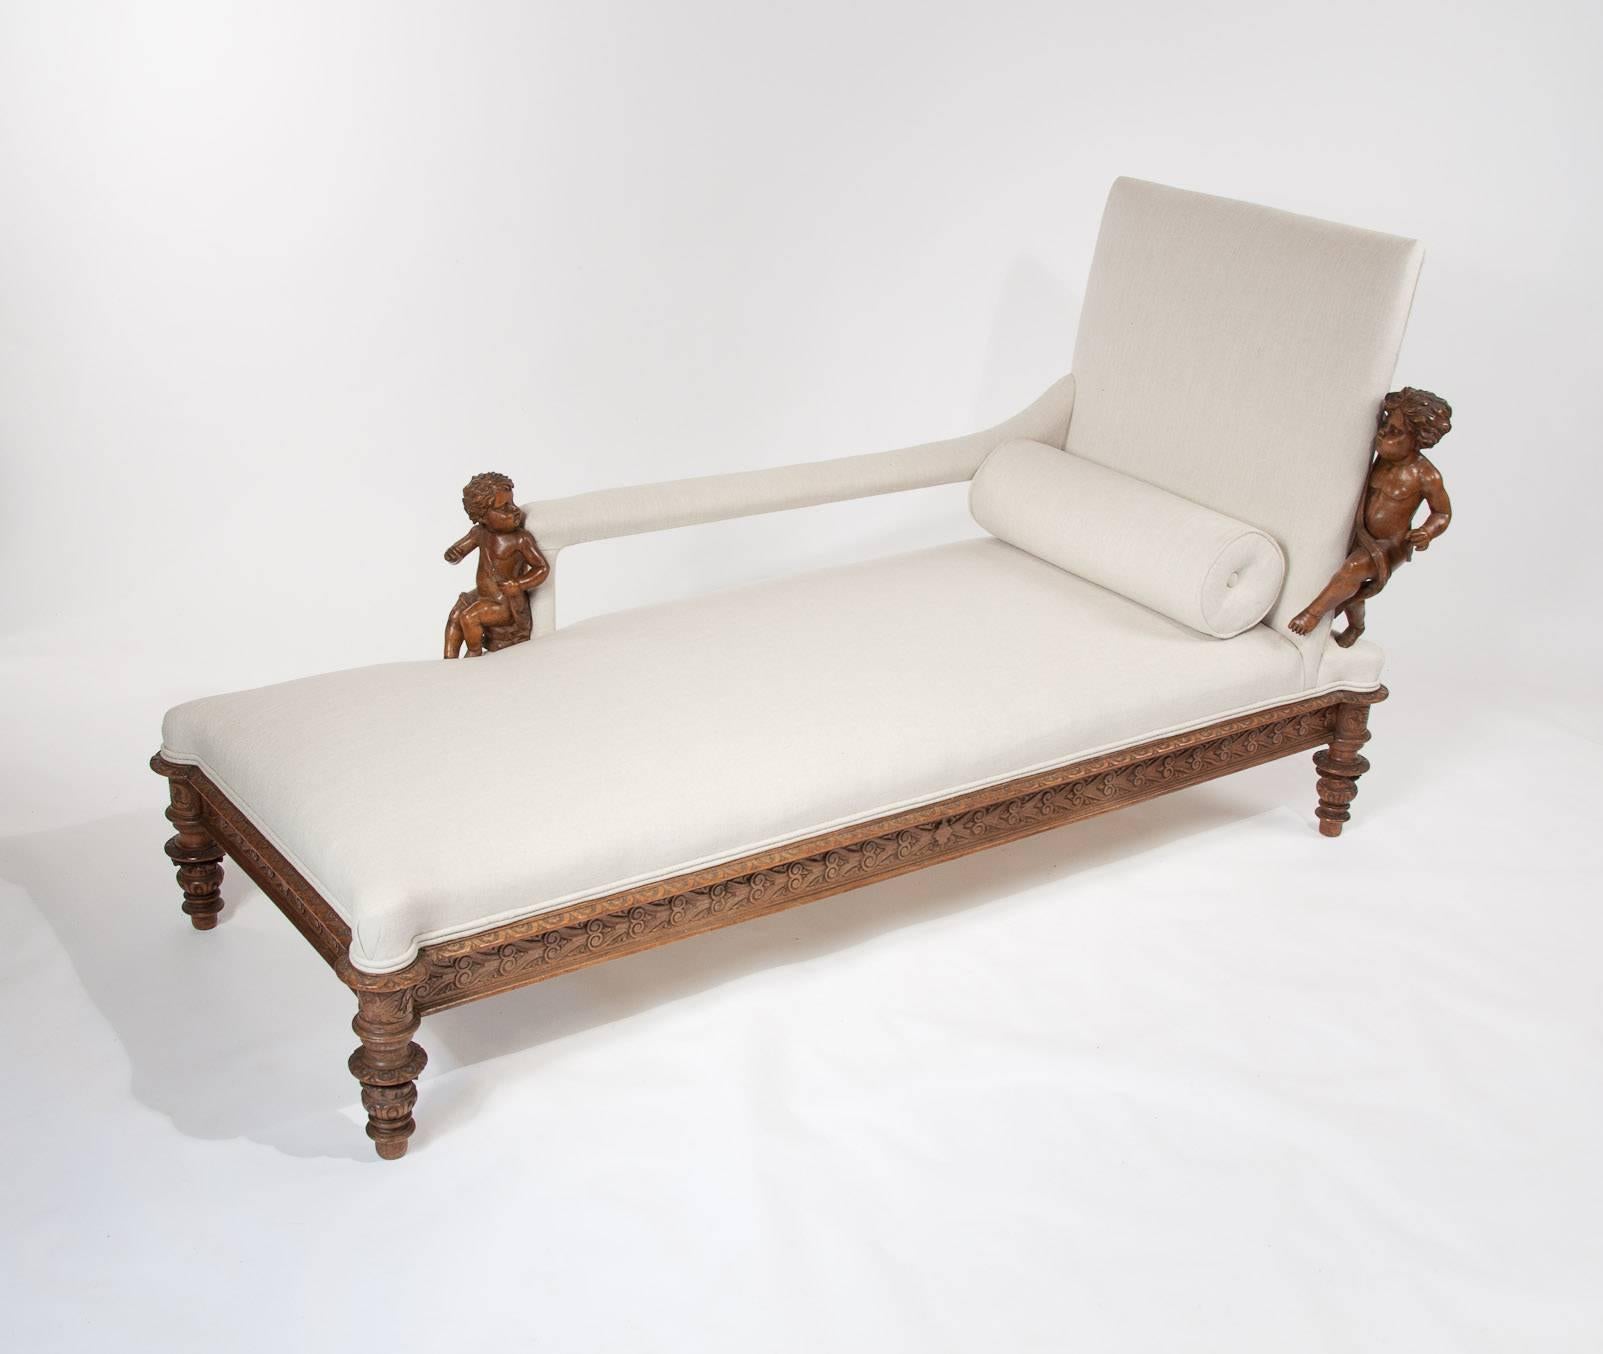 A stunning 19th century carved walnut Italian chaise longue adorned with decorative cherubs. This delightful chaise dating to the mid-19th century originating from Italy is constructed from solid walnut and being newly upholstered is very